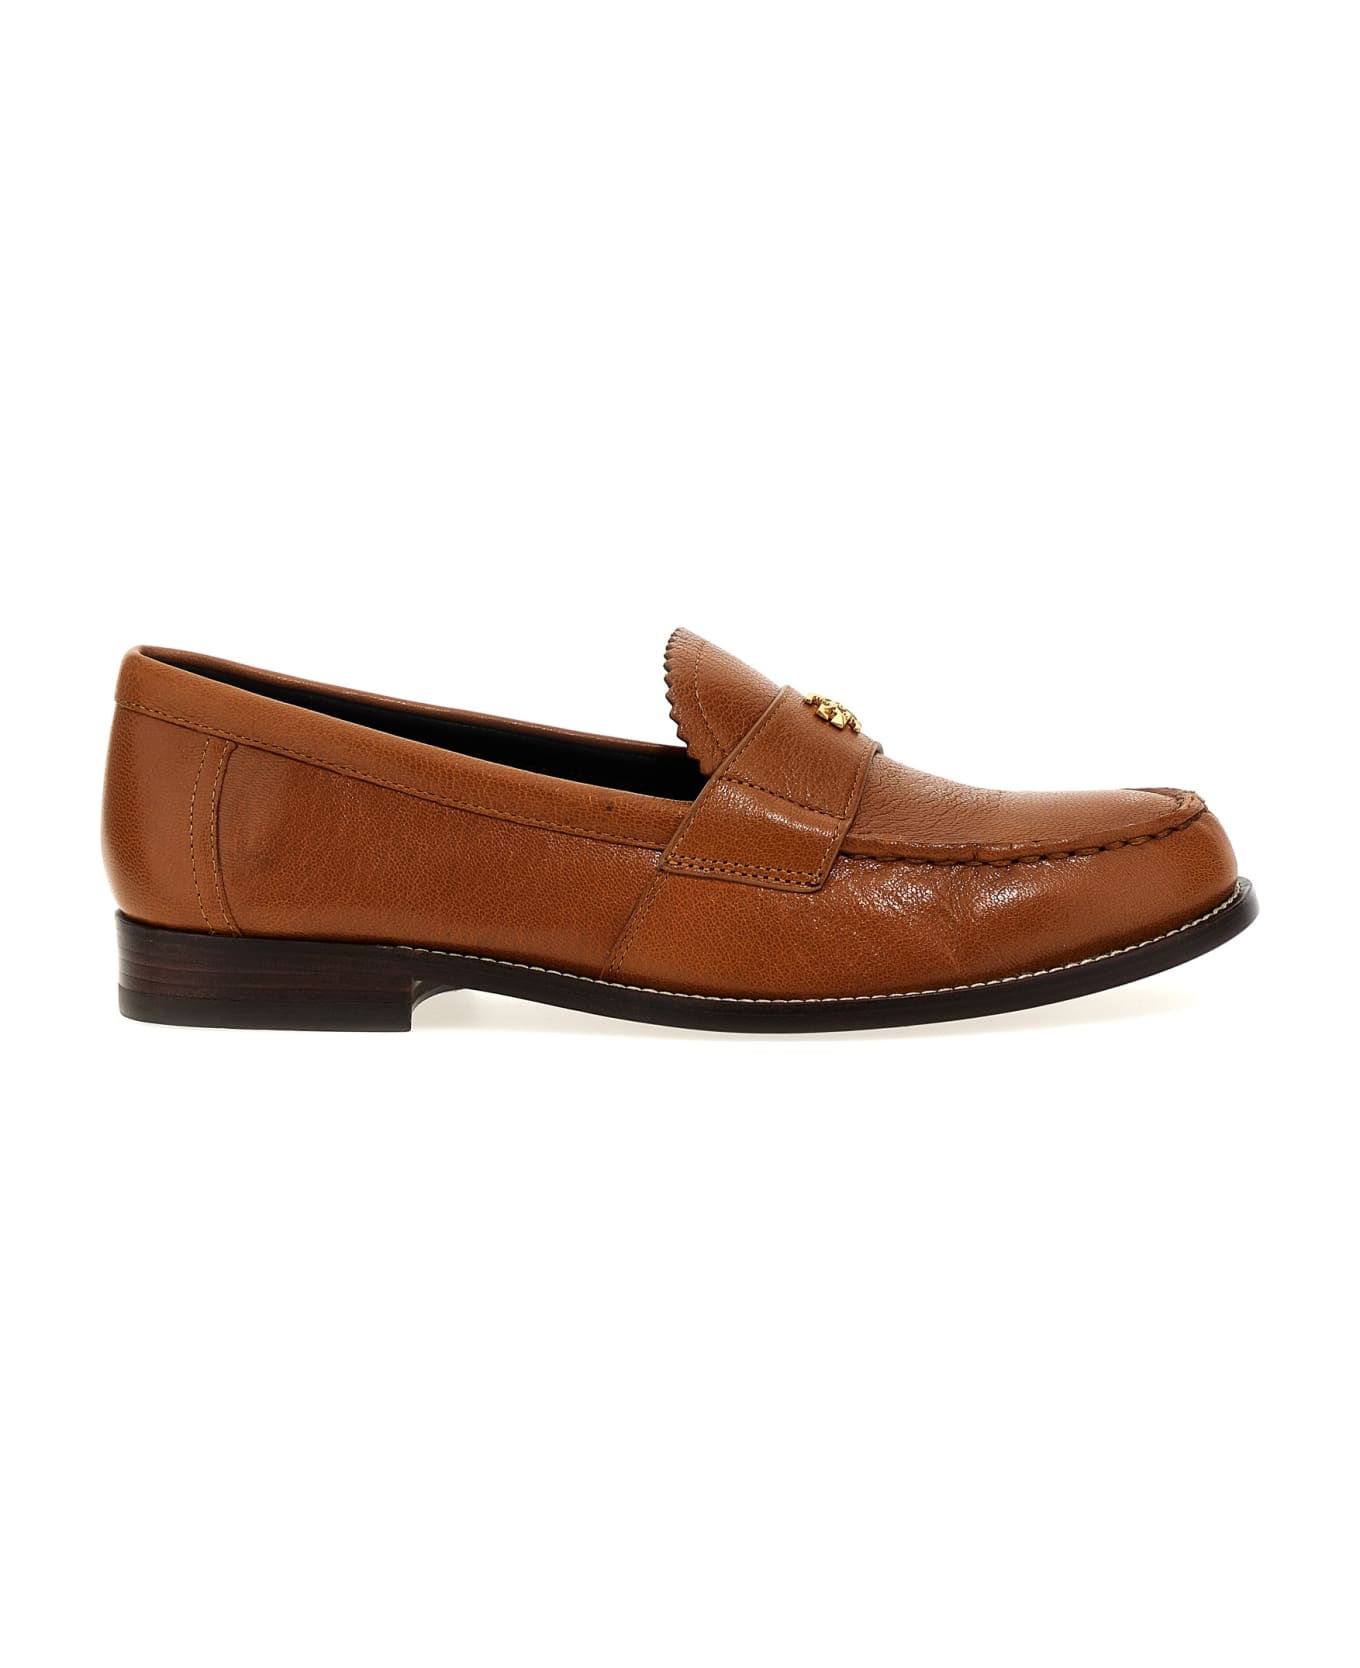 Tory Burch Camel Leather Loafers - Brown